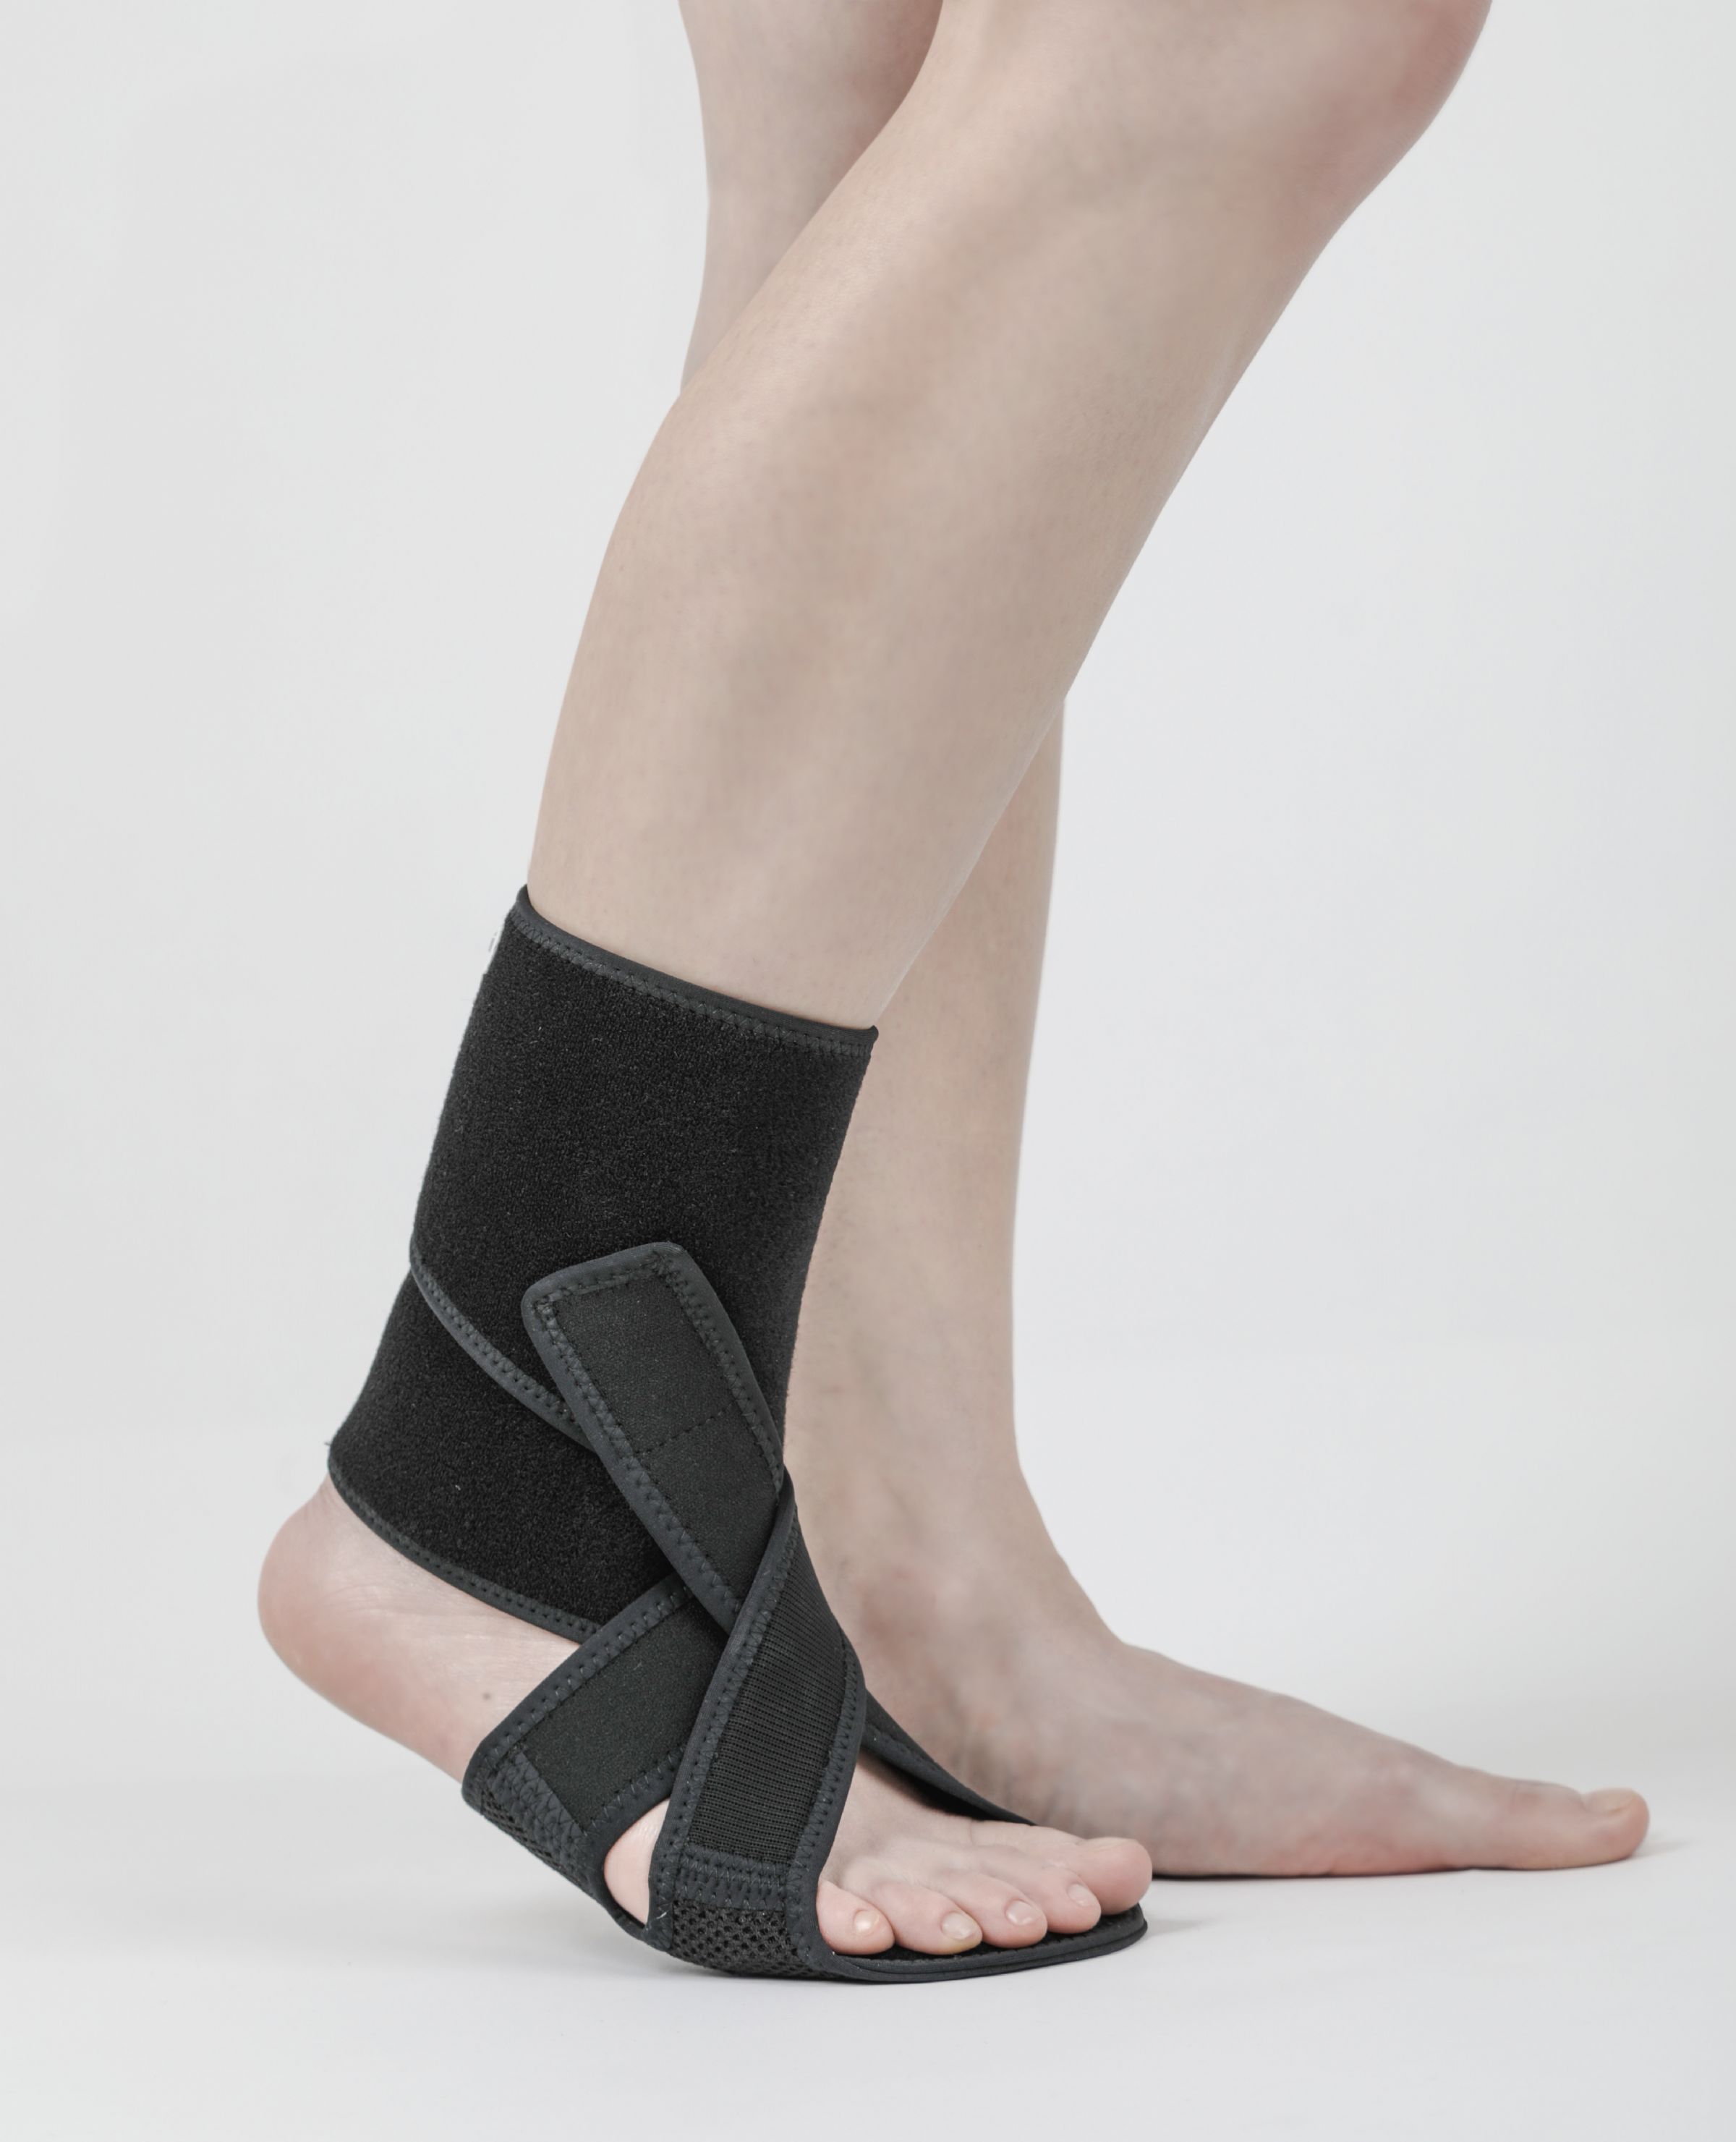 Drop Foot Brace by Neofect